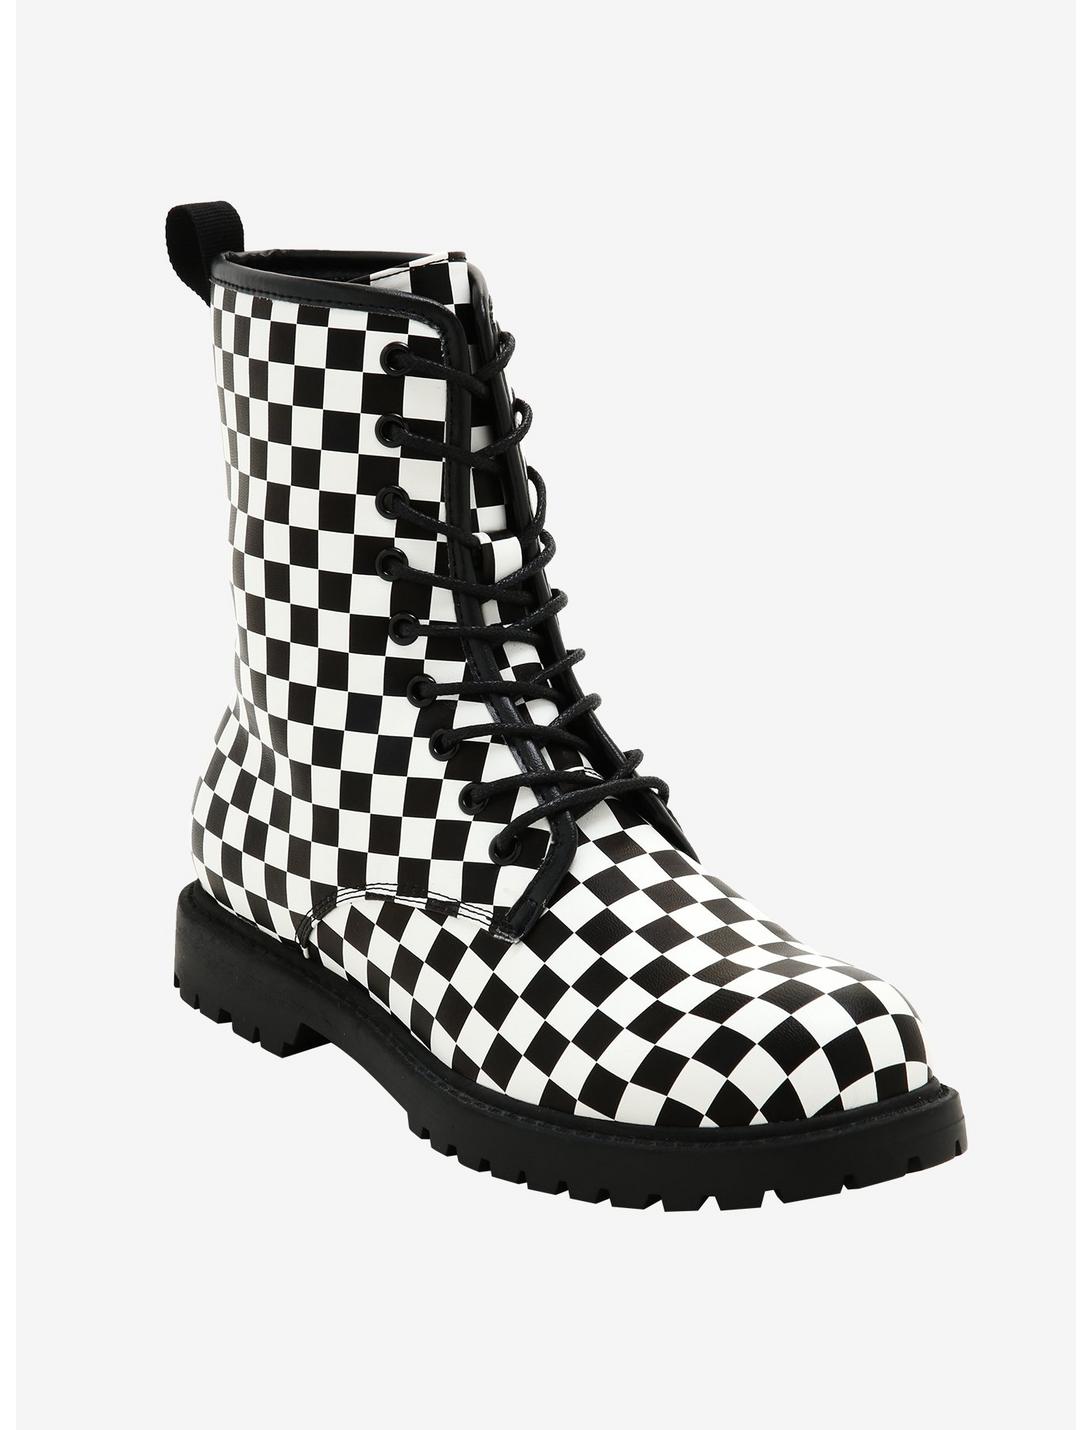 Entertain Candles Witty Black & White Checkered Combat Boots | Hot Topic